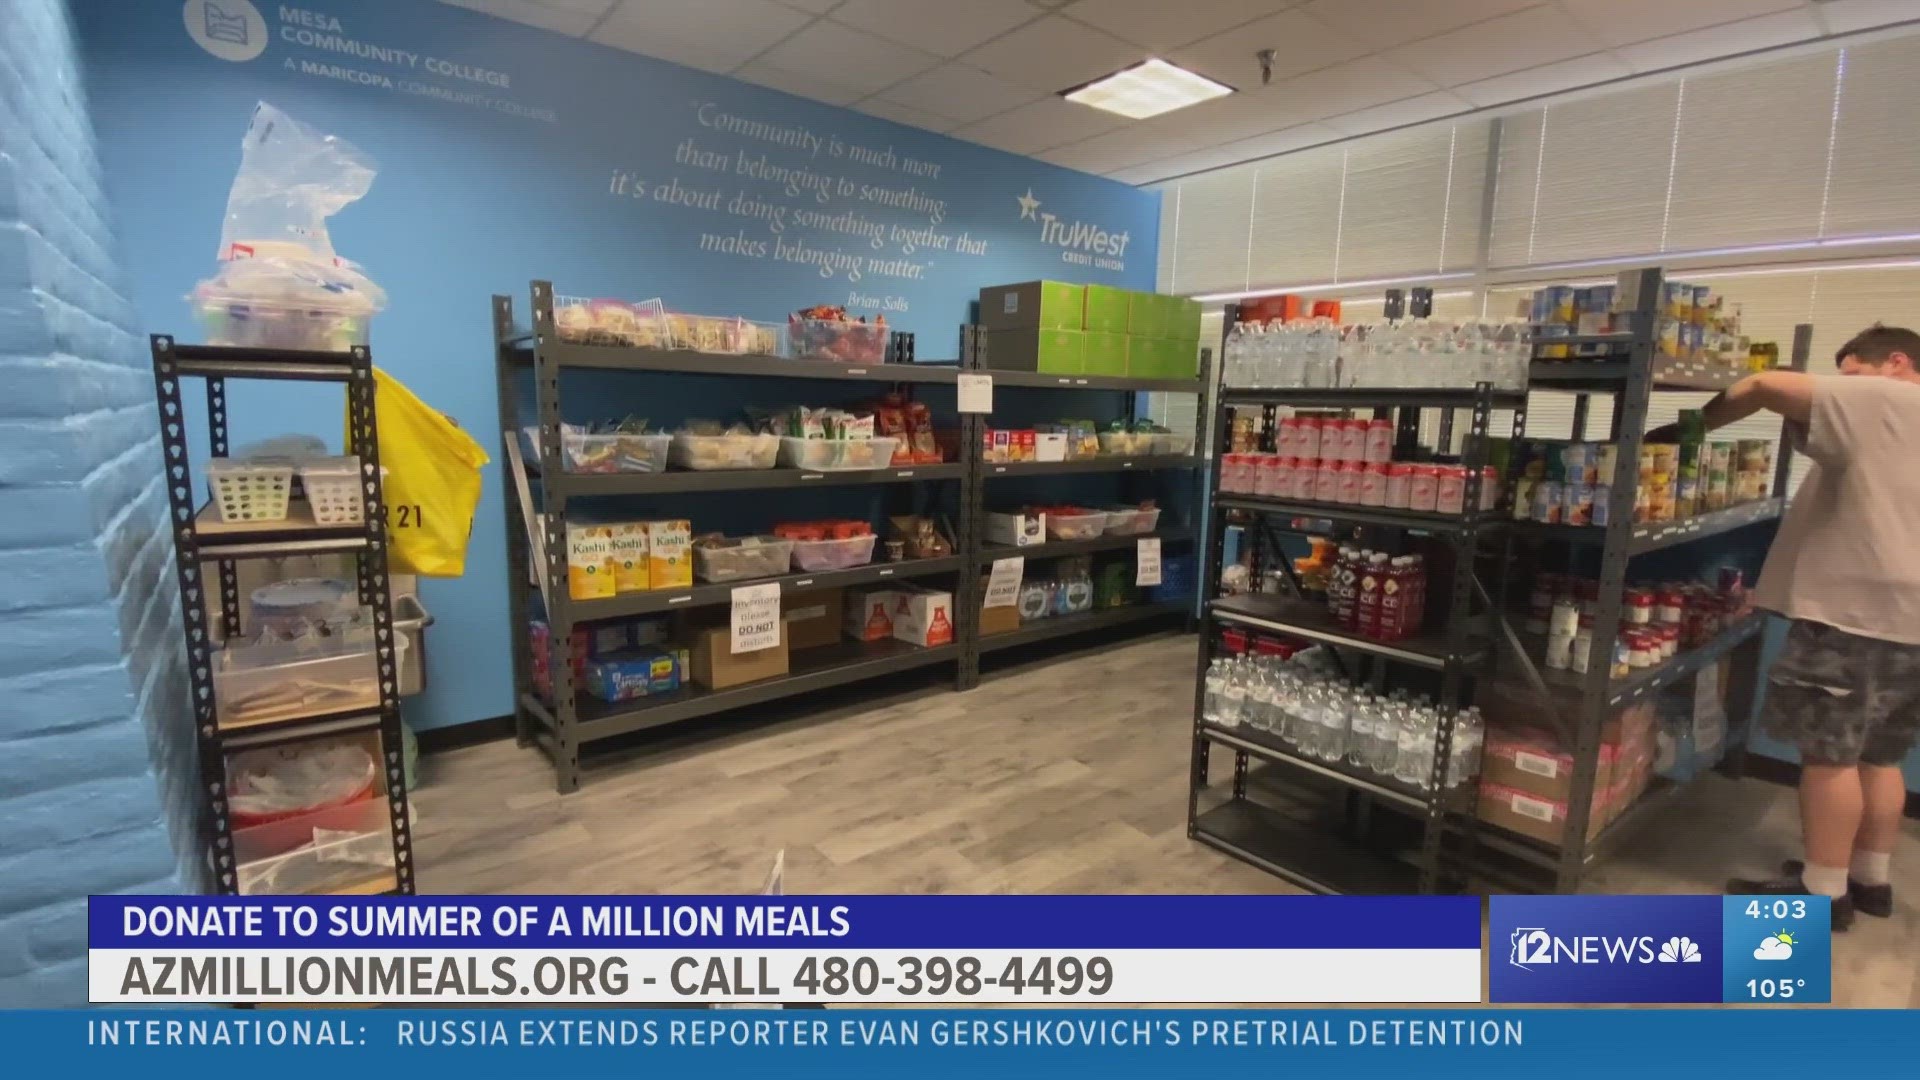 Mesa Community College students struggling to afford all their living expenses have access to a market that can provide food and supplies.